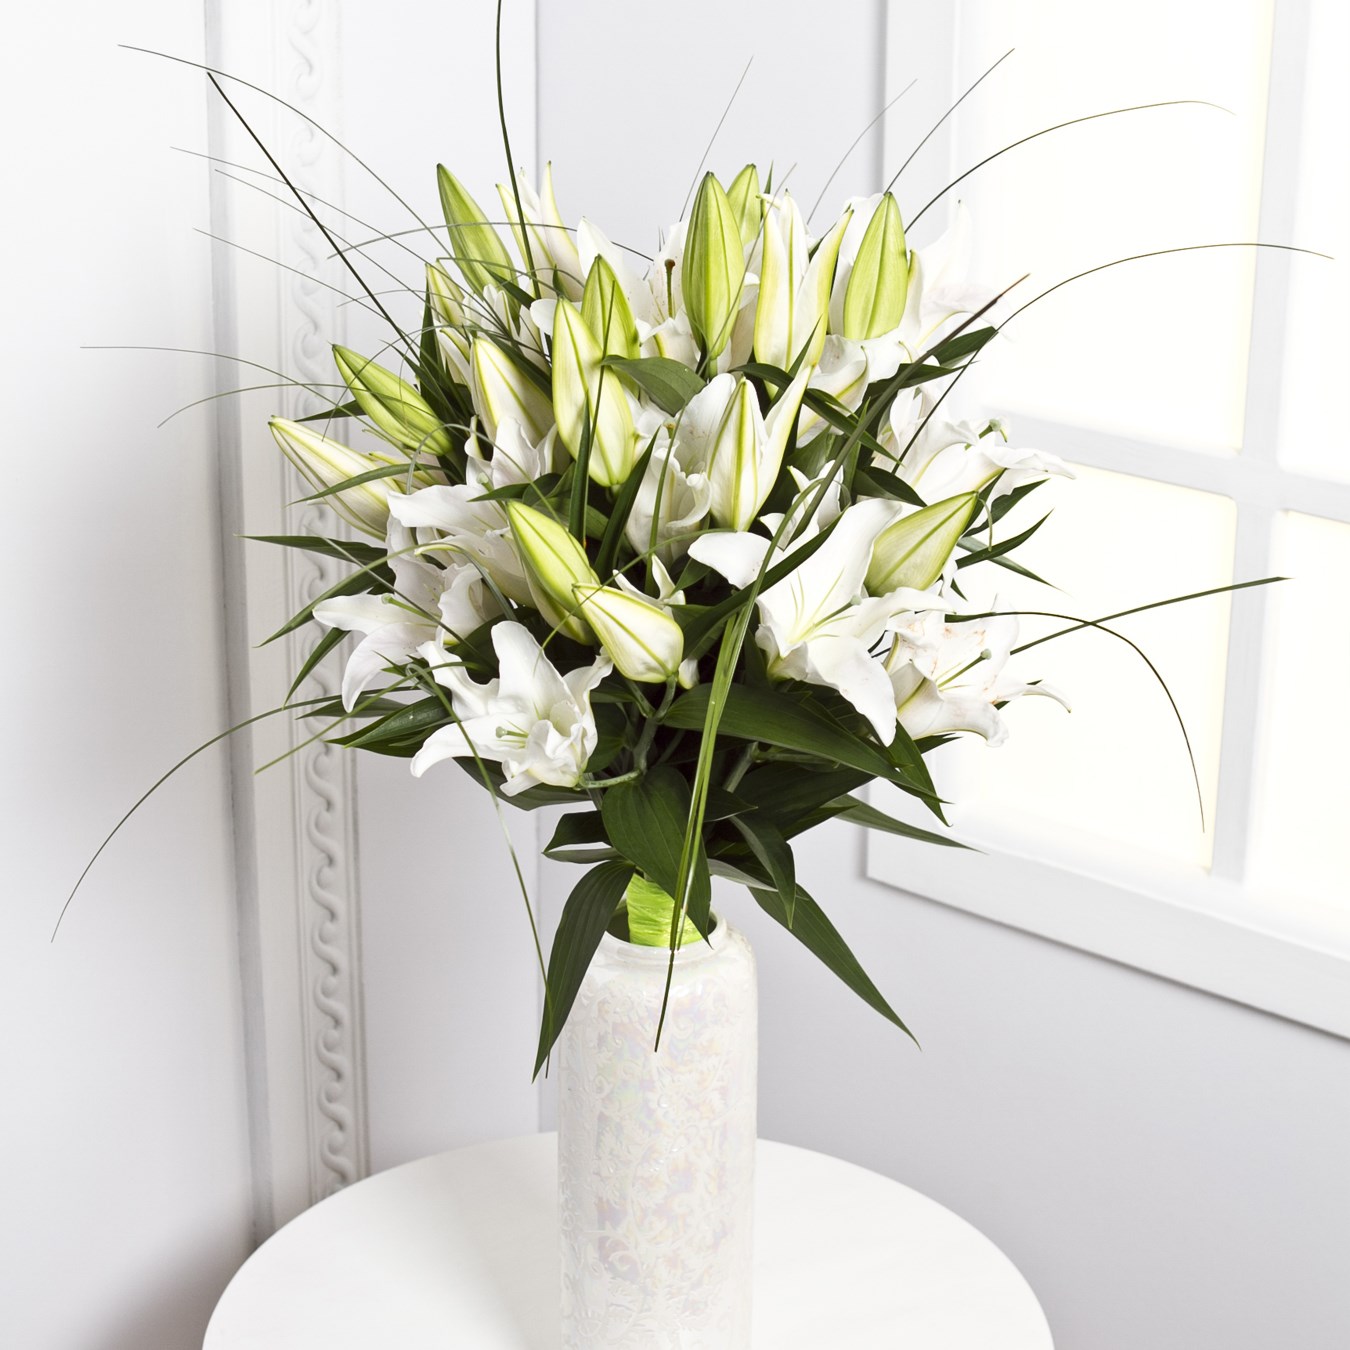 Sympathy Bouquet with White Lilies